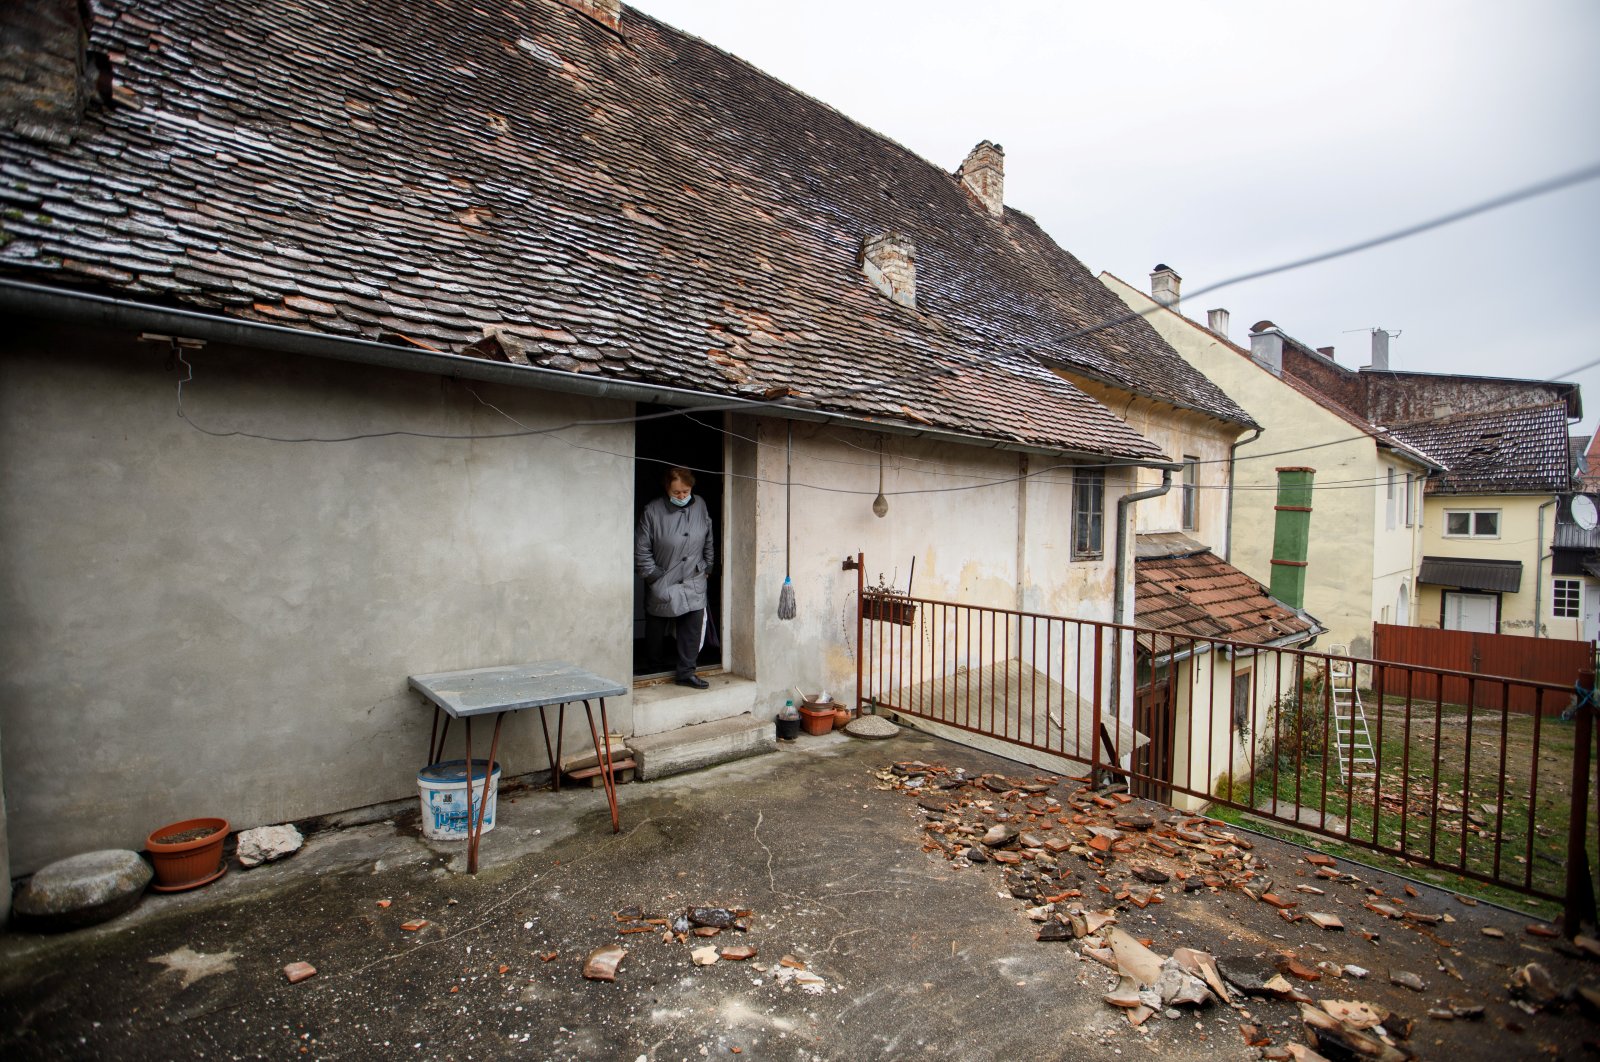 The damaged home of Ankica Loncarevic is seen after a 5.2 magnitude earthquake in Petrinja, Croatia, Dec. 28, 2020. (Reuters Photo)